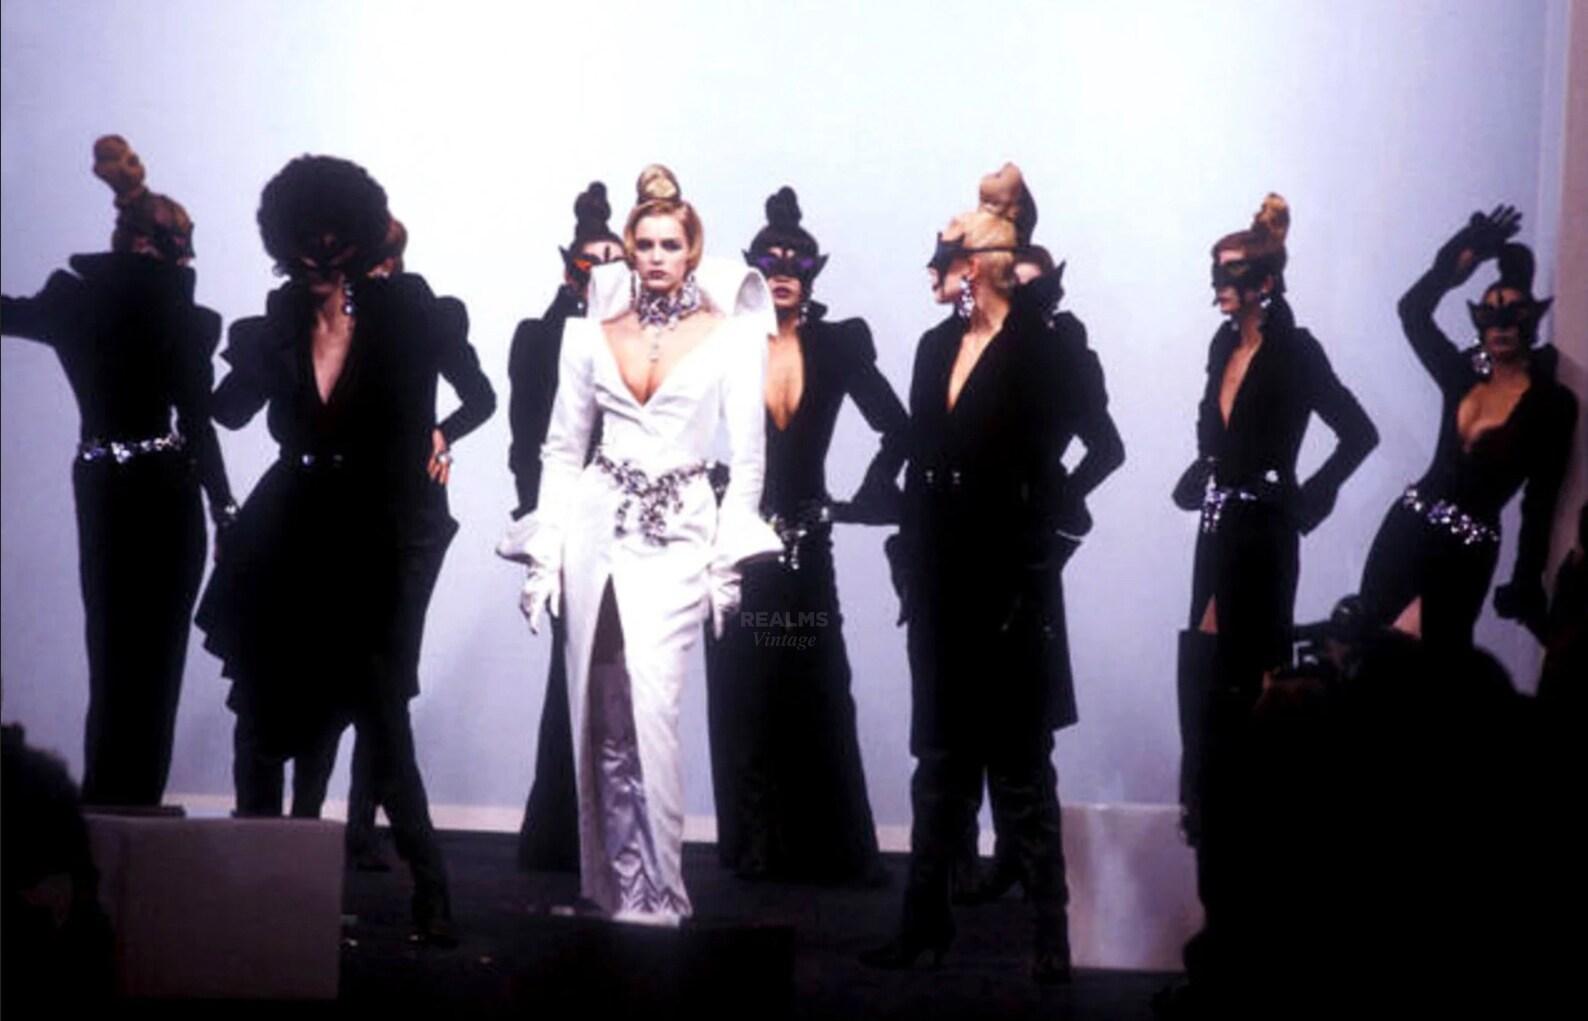 Stunning Thierry Mugler Archival  FW 1986 Evening Gown Crytsal Black Dress  For Sale 5